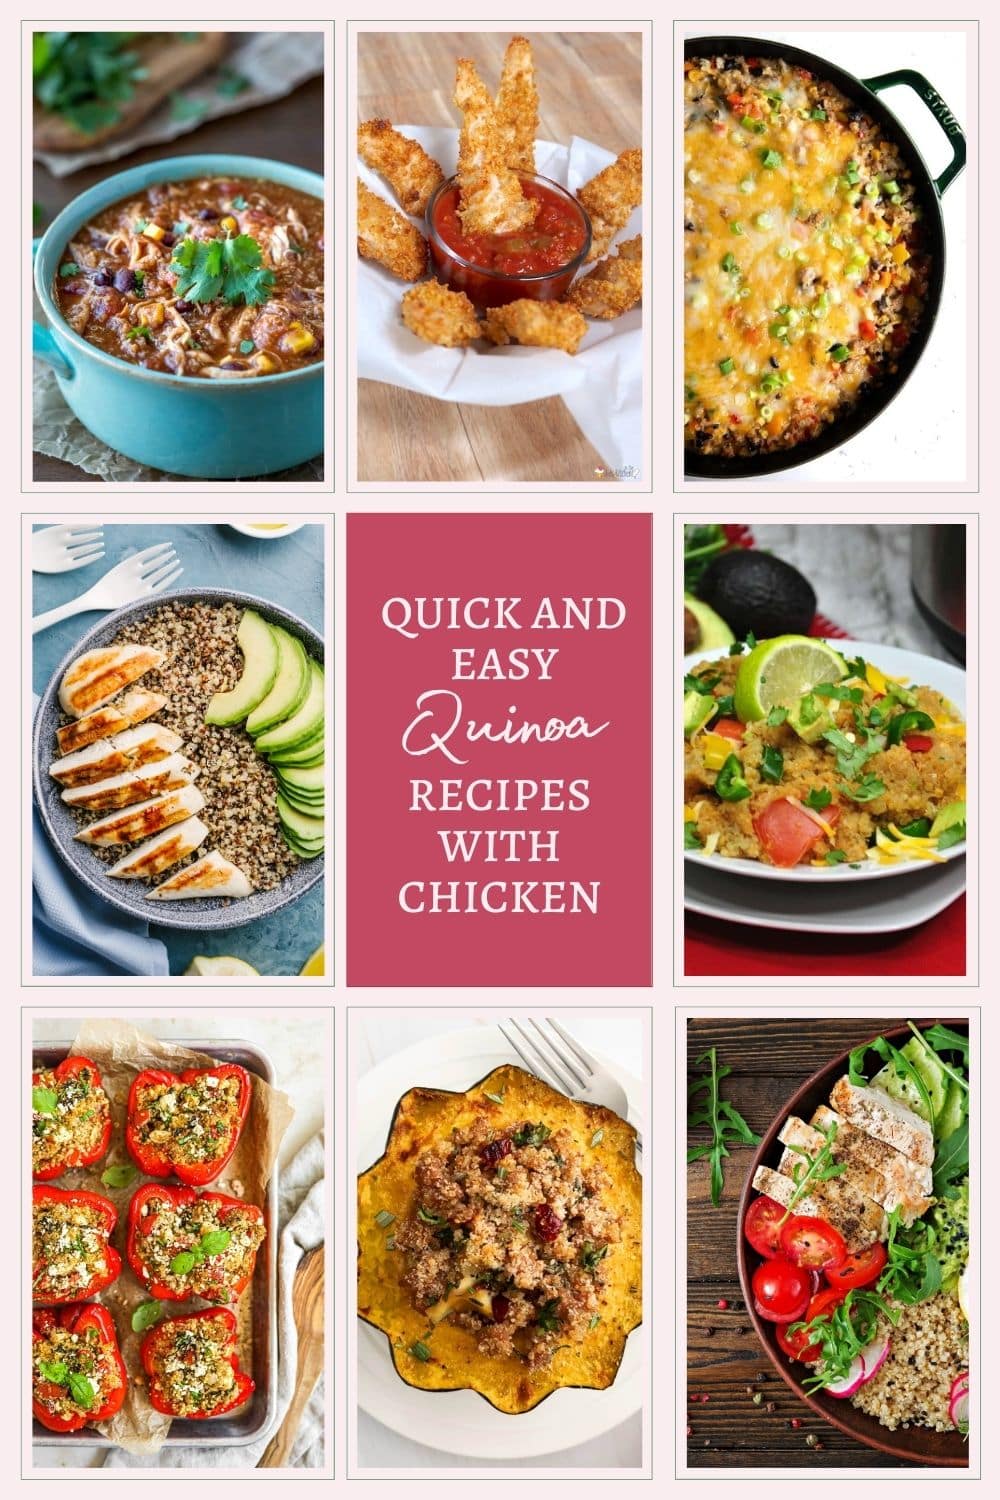 10 Quick and Easy Quinoa Recipes with Chicken